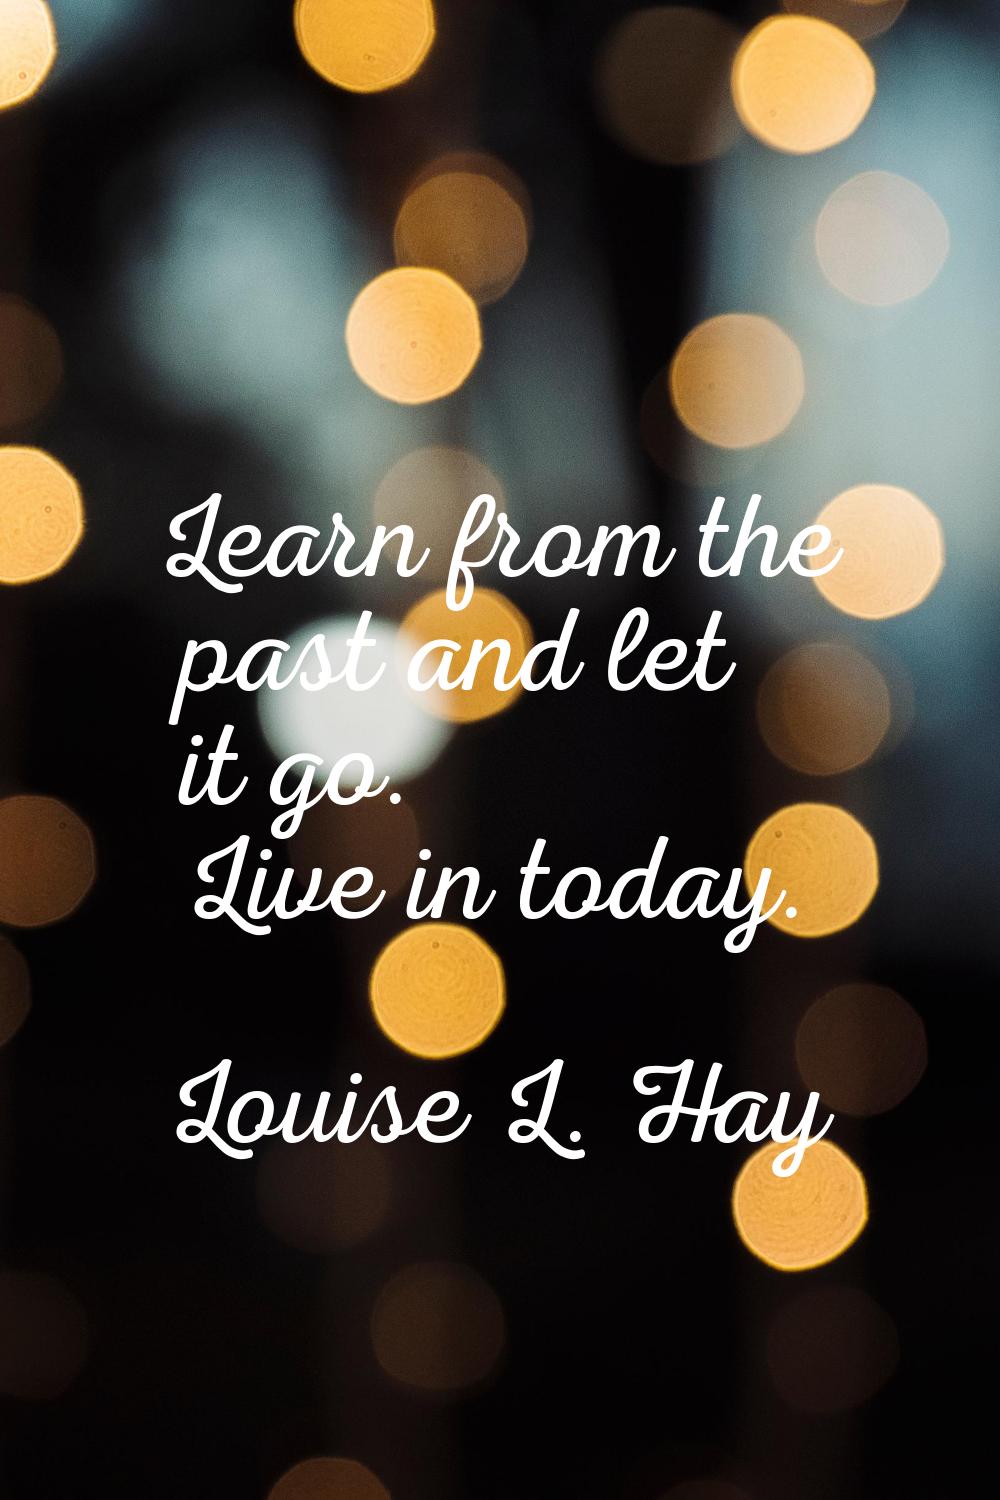 Learn from the past and let it go. Live in today.